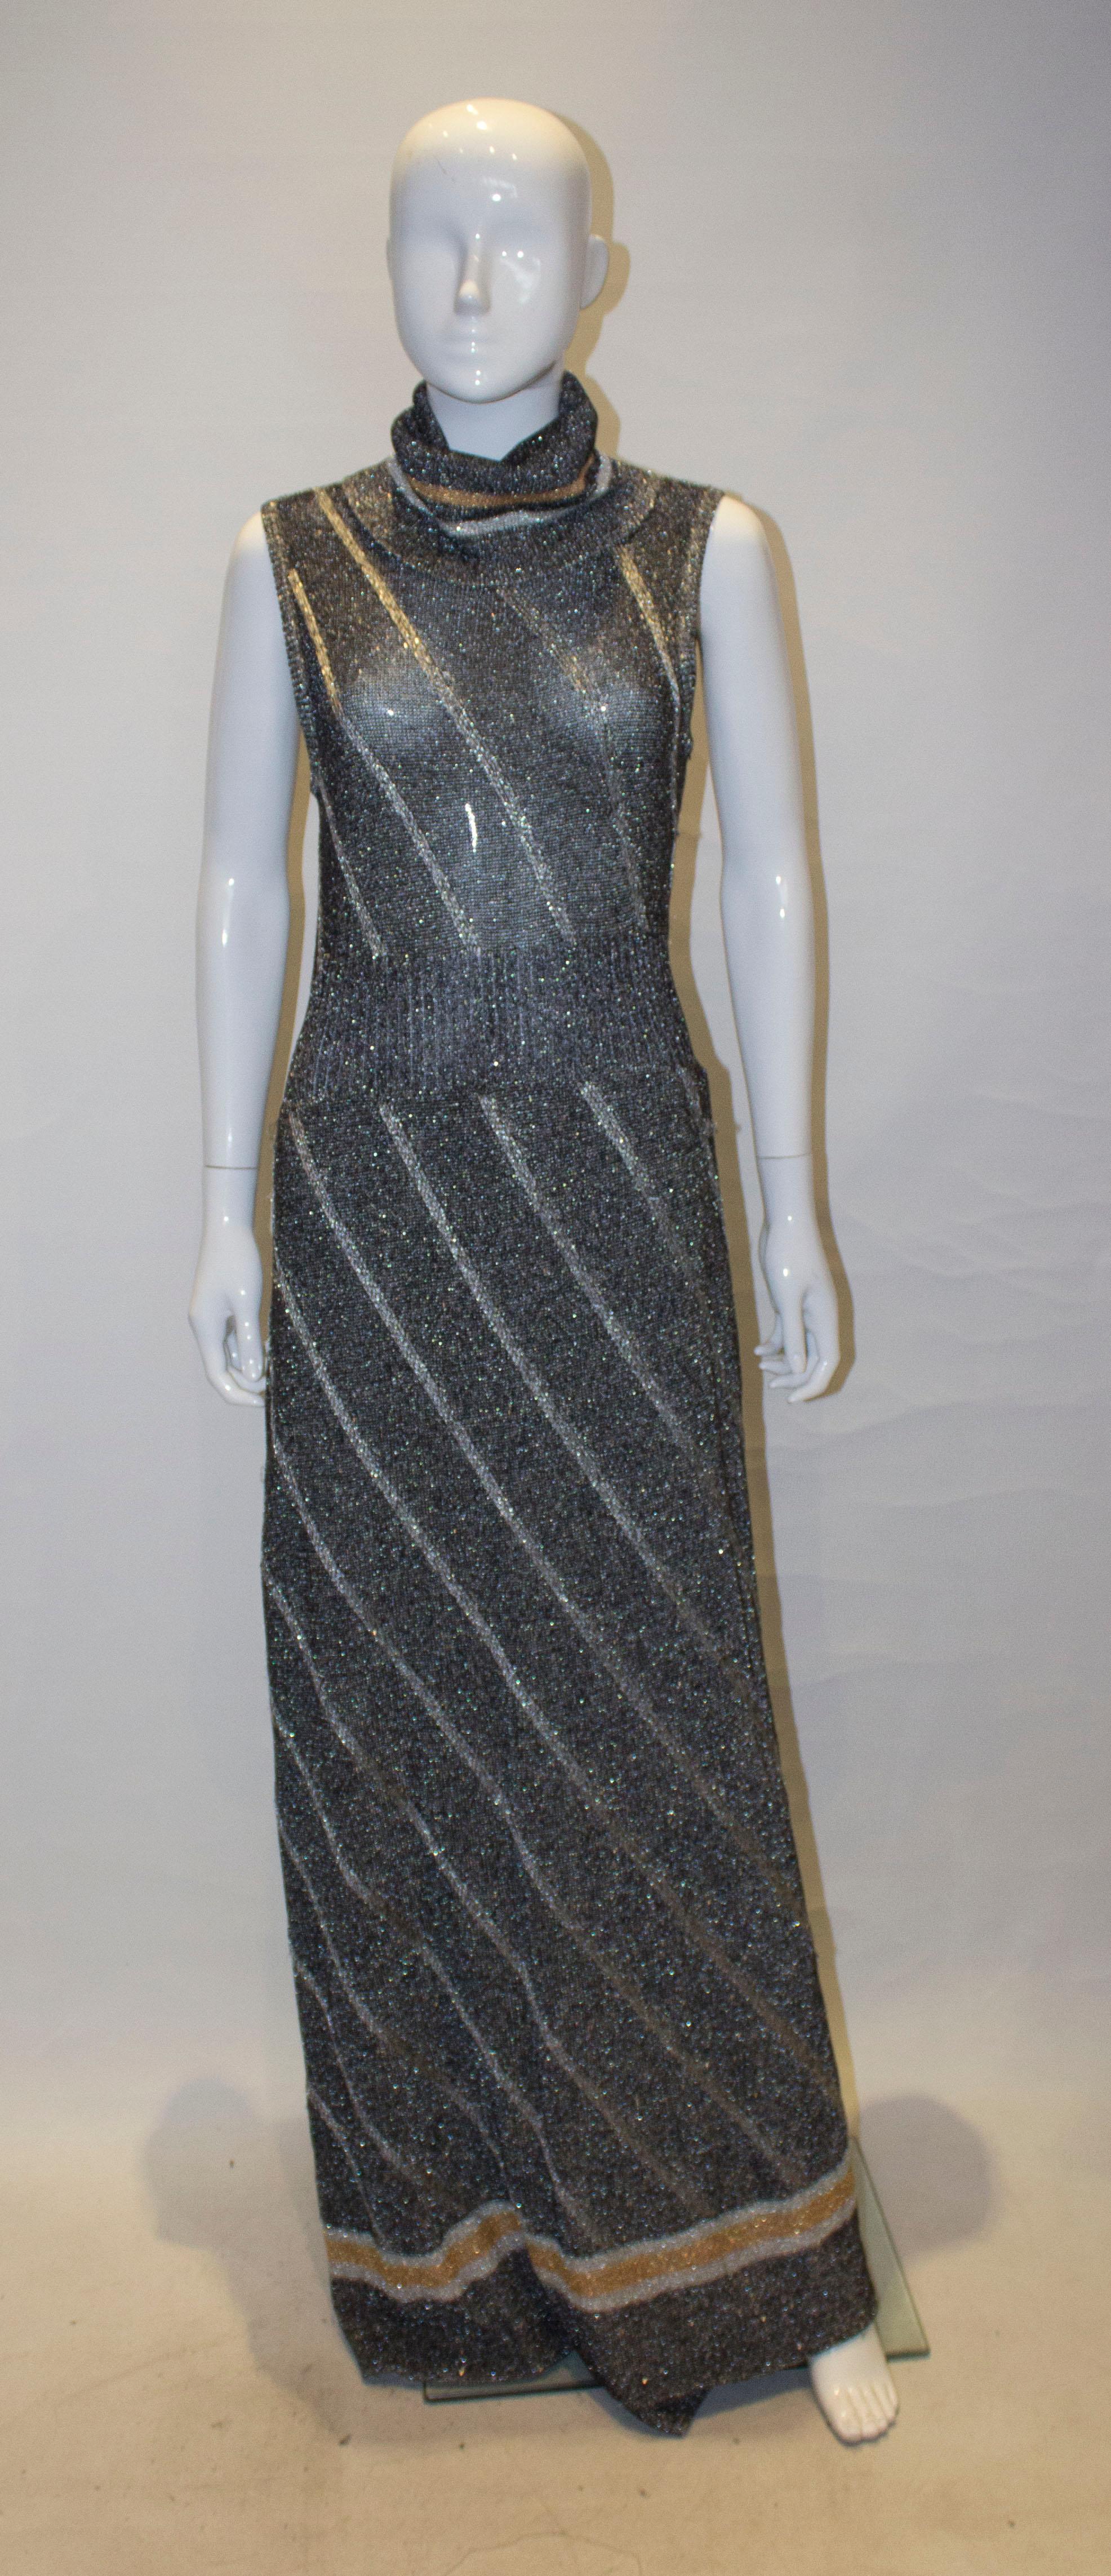 A chic knitted dress and jacket by Ian Peters. The dress is in a silver, gold and dark grey metallic mix , and has a roll neck and is lined from the waist down., and has a central zip fastening.  There is a matching cardigan /jacket with tie